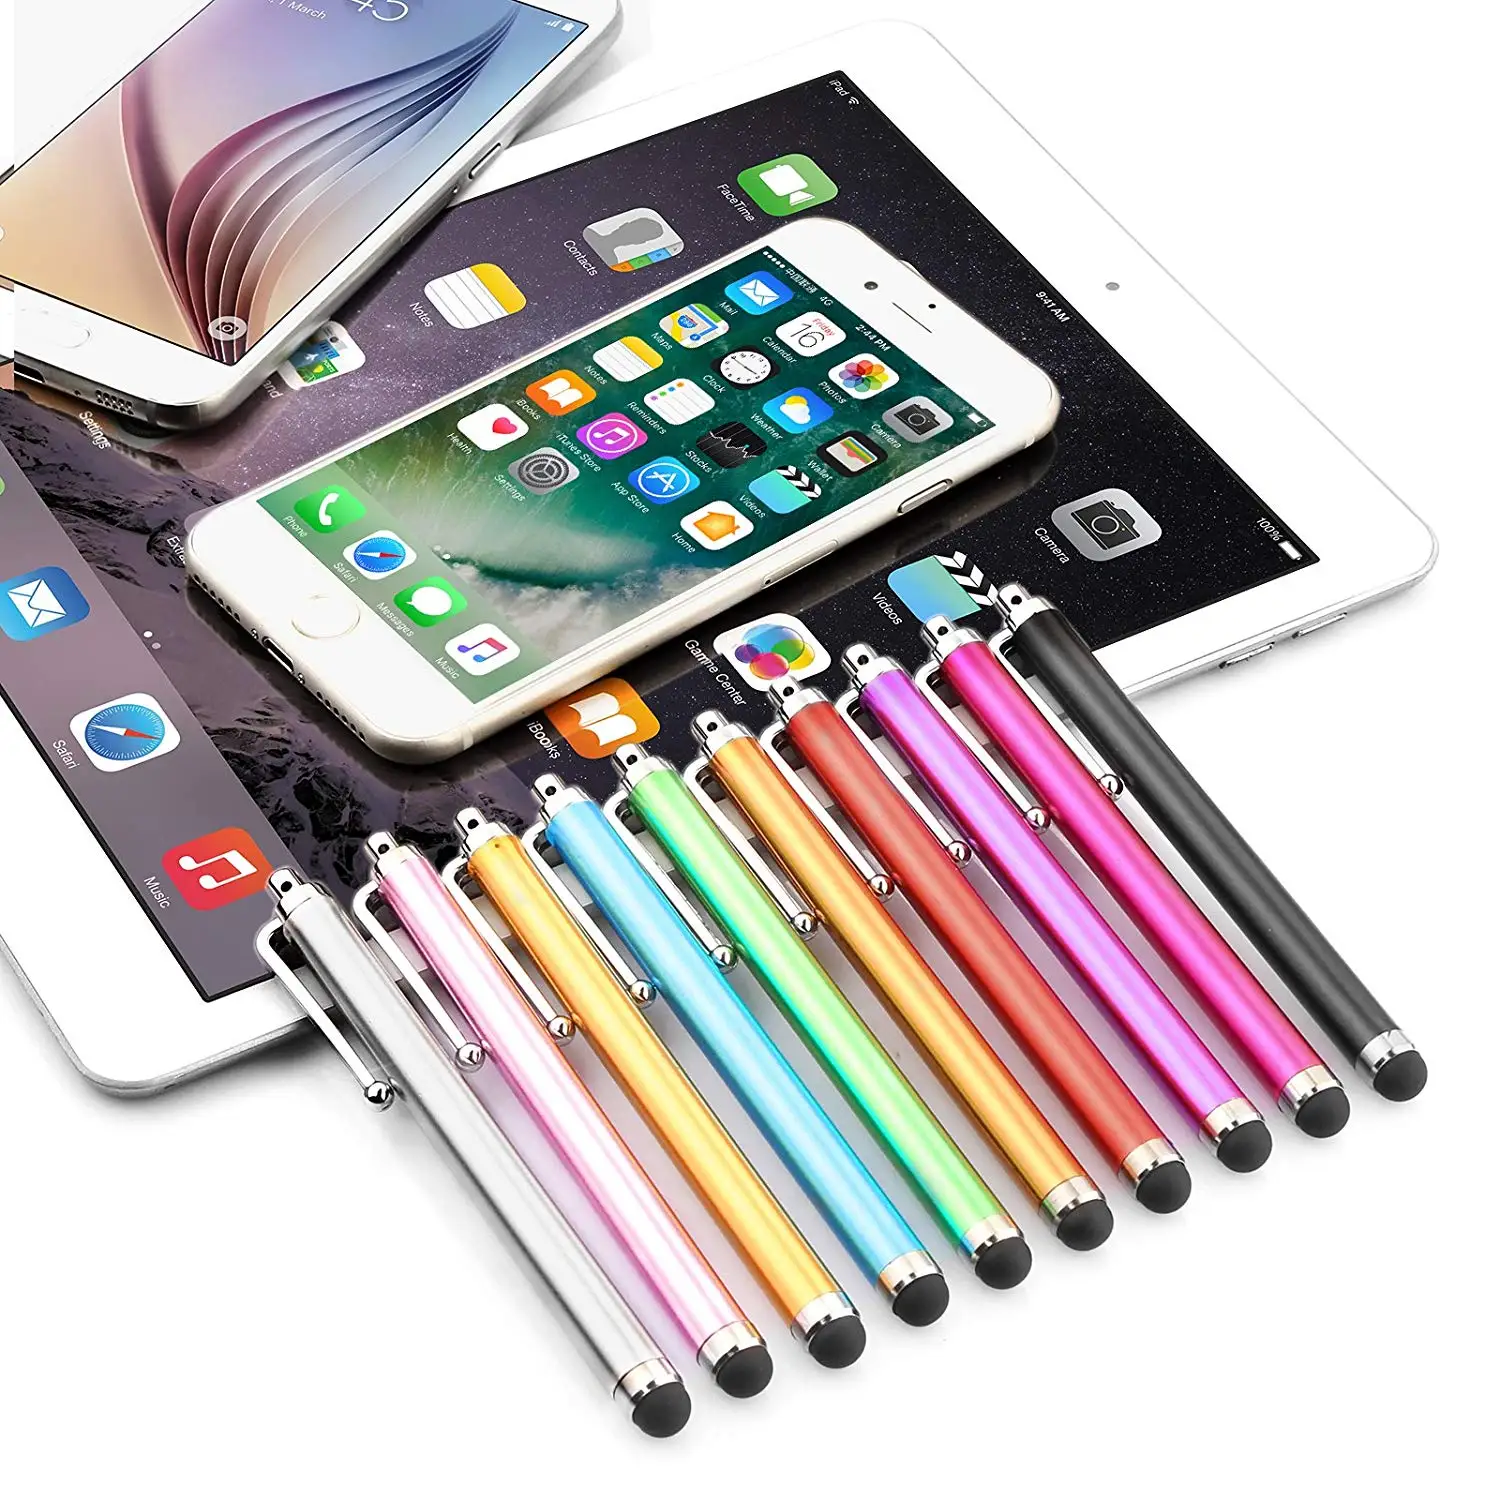 10Pc/Lot Universal Metal Touch Screen Pen Stylus Pens for Ipad Apple Samsung Tablet All Capacitive Screen with Clip images - 6